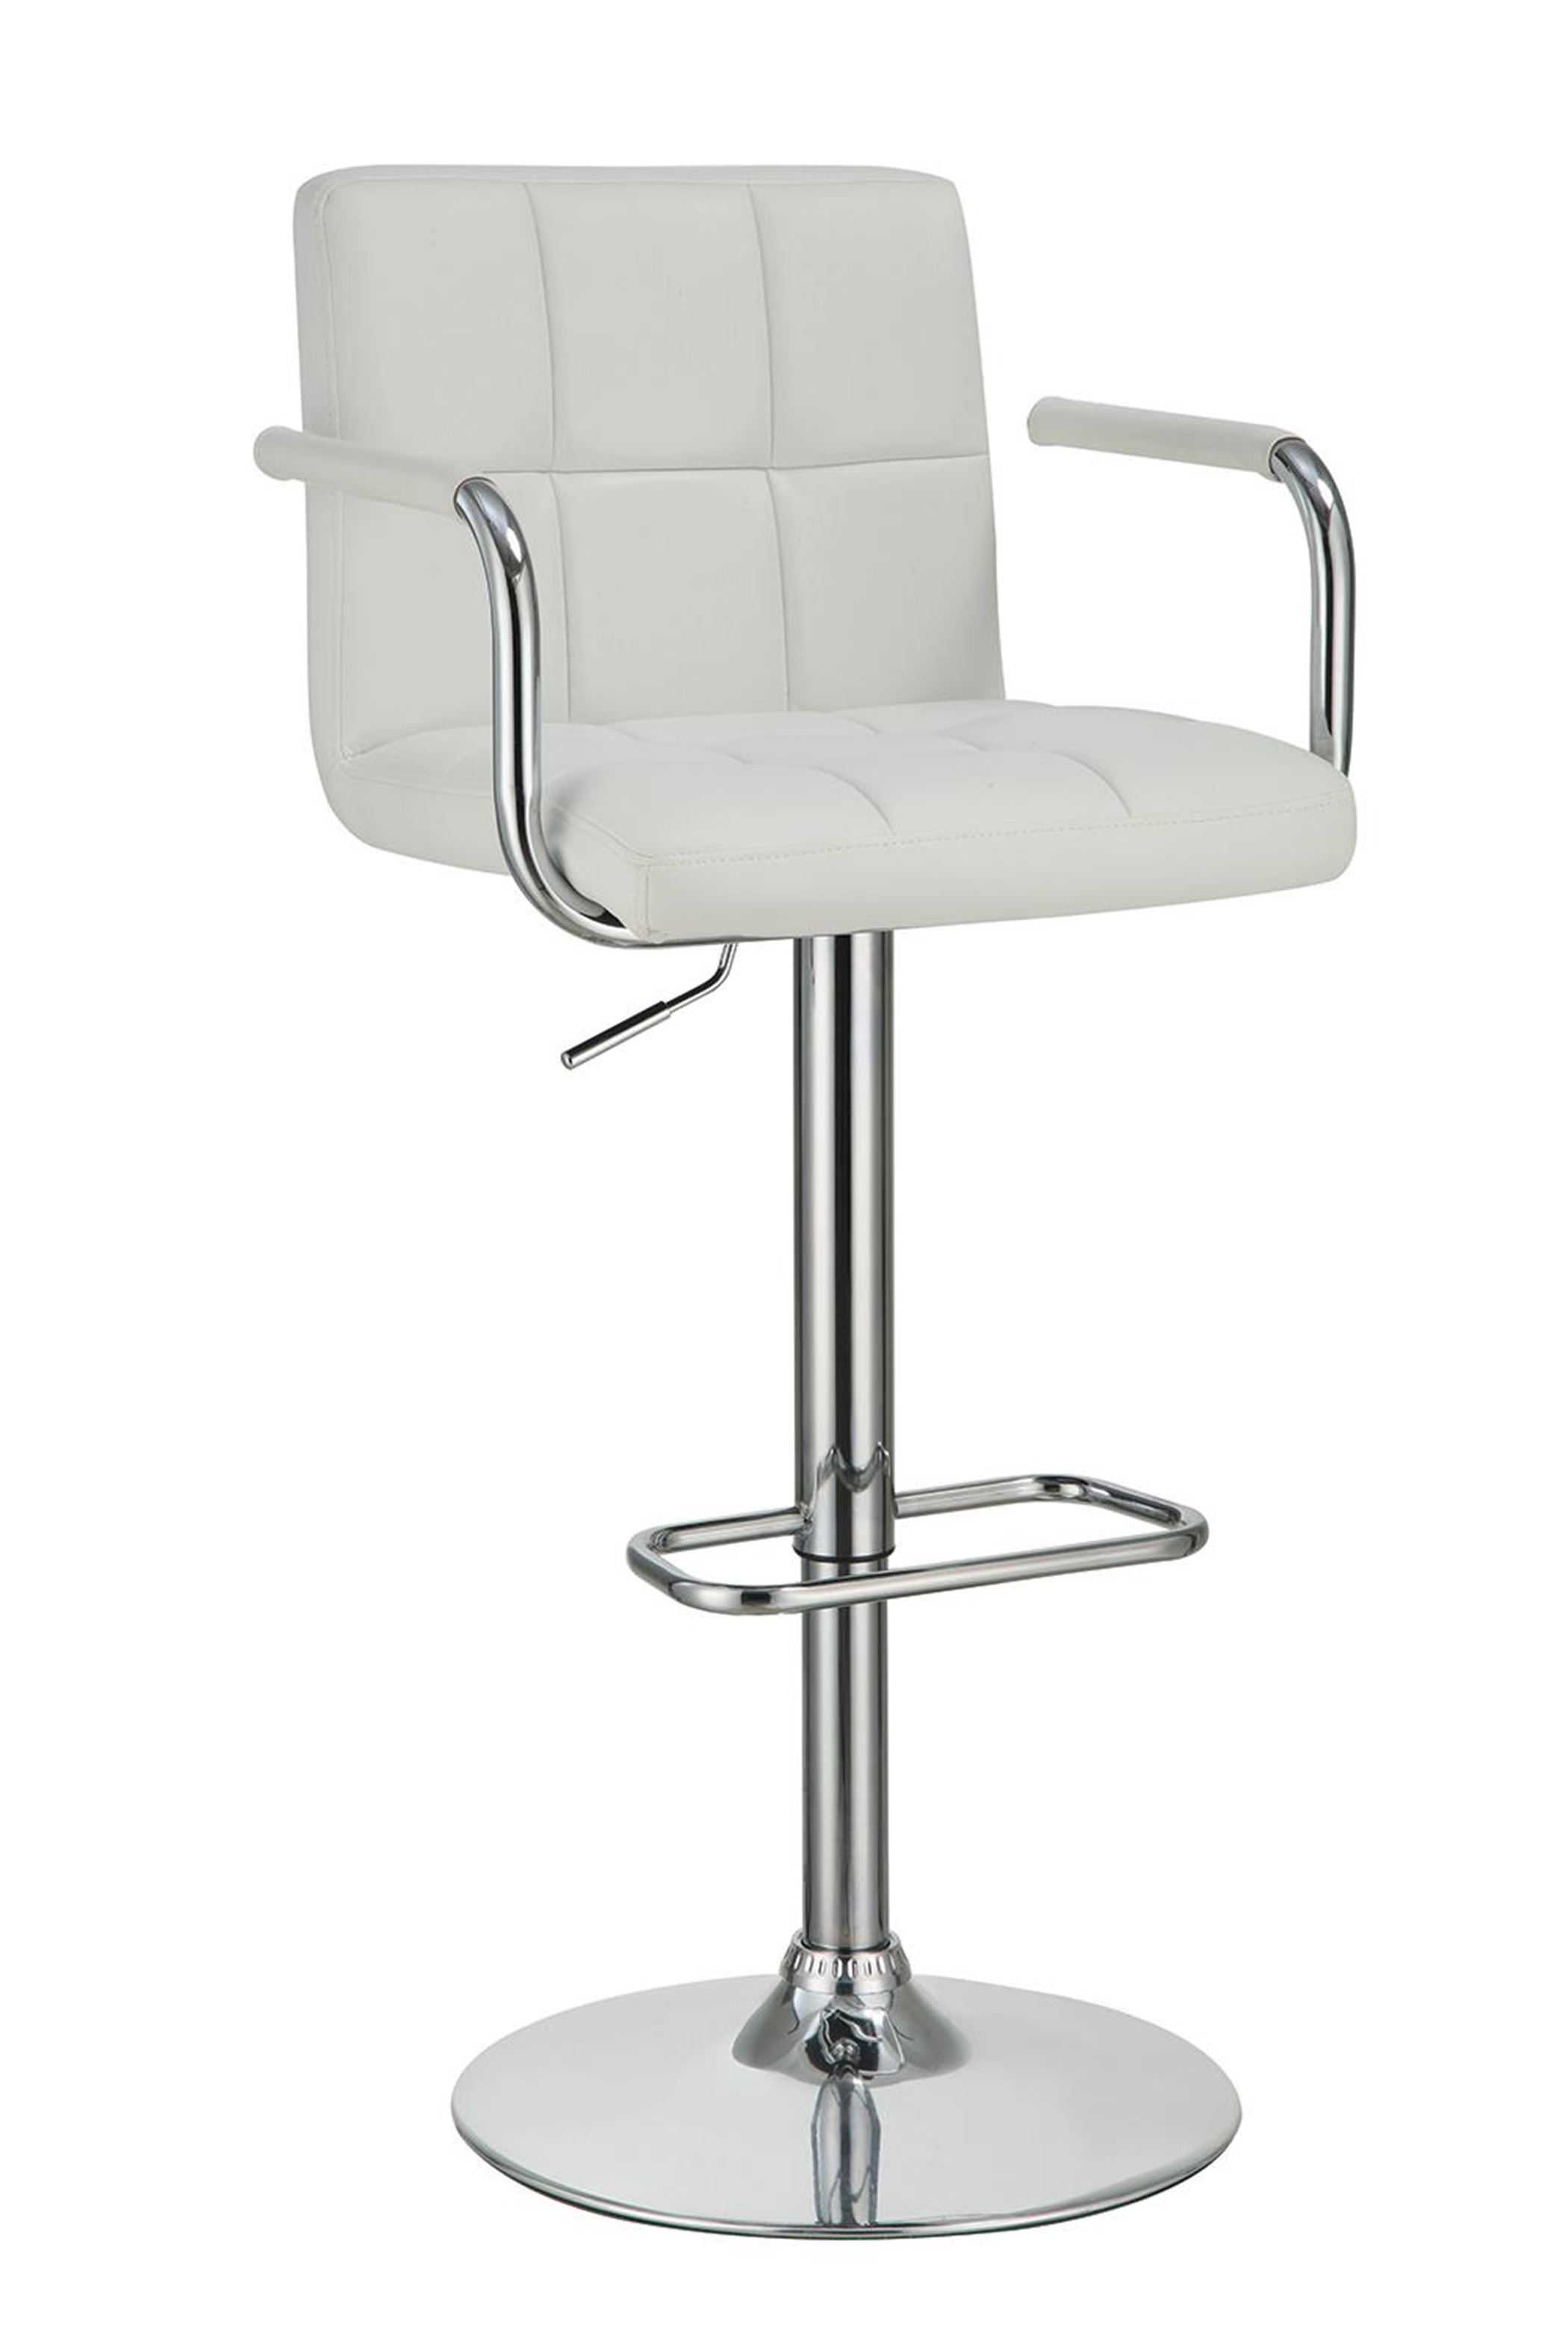 Contemporary White and Chrome Adjustable Bar Stool with Arms - Click Image to Close